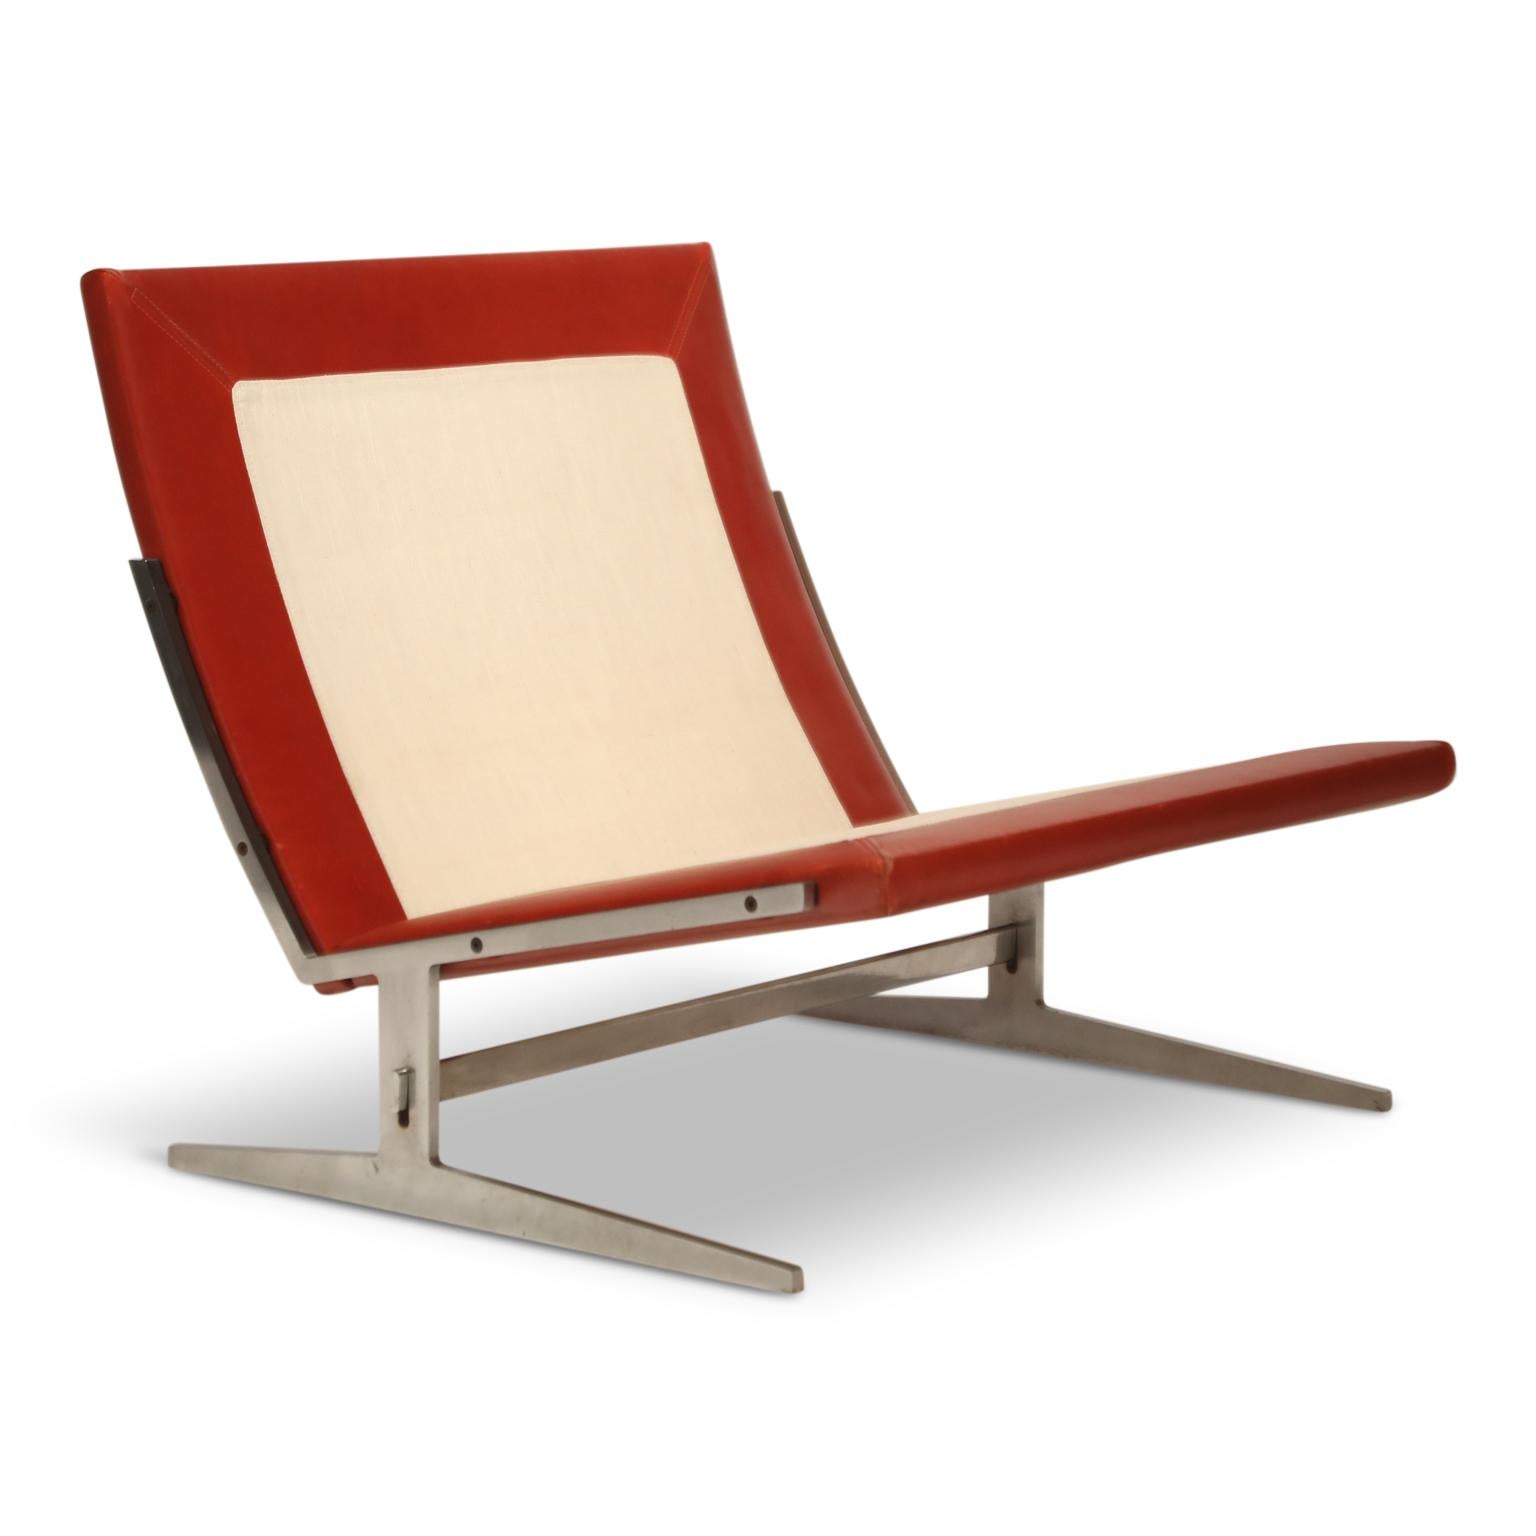 Steel BO-561 Lounge Chairs by Preben Fabricius and Jørgen Kastholm for Bo-Ex, 1962